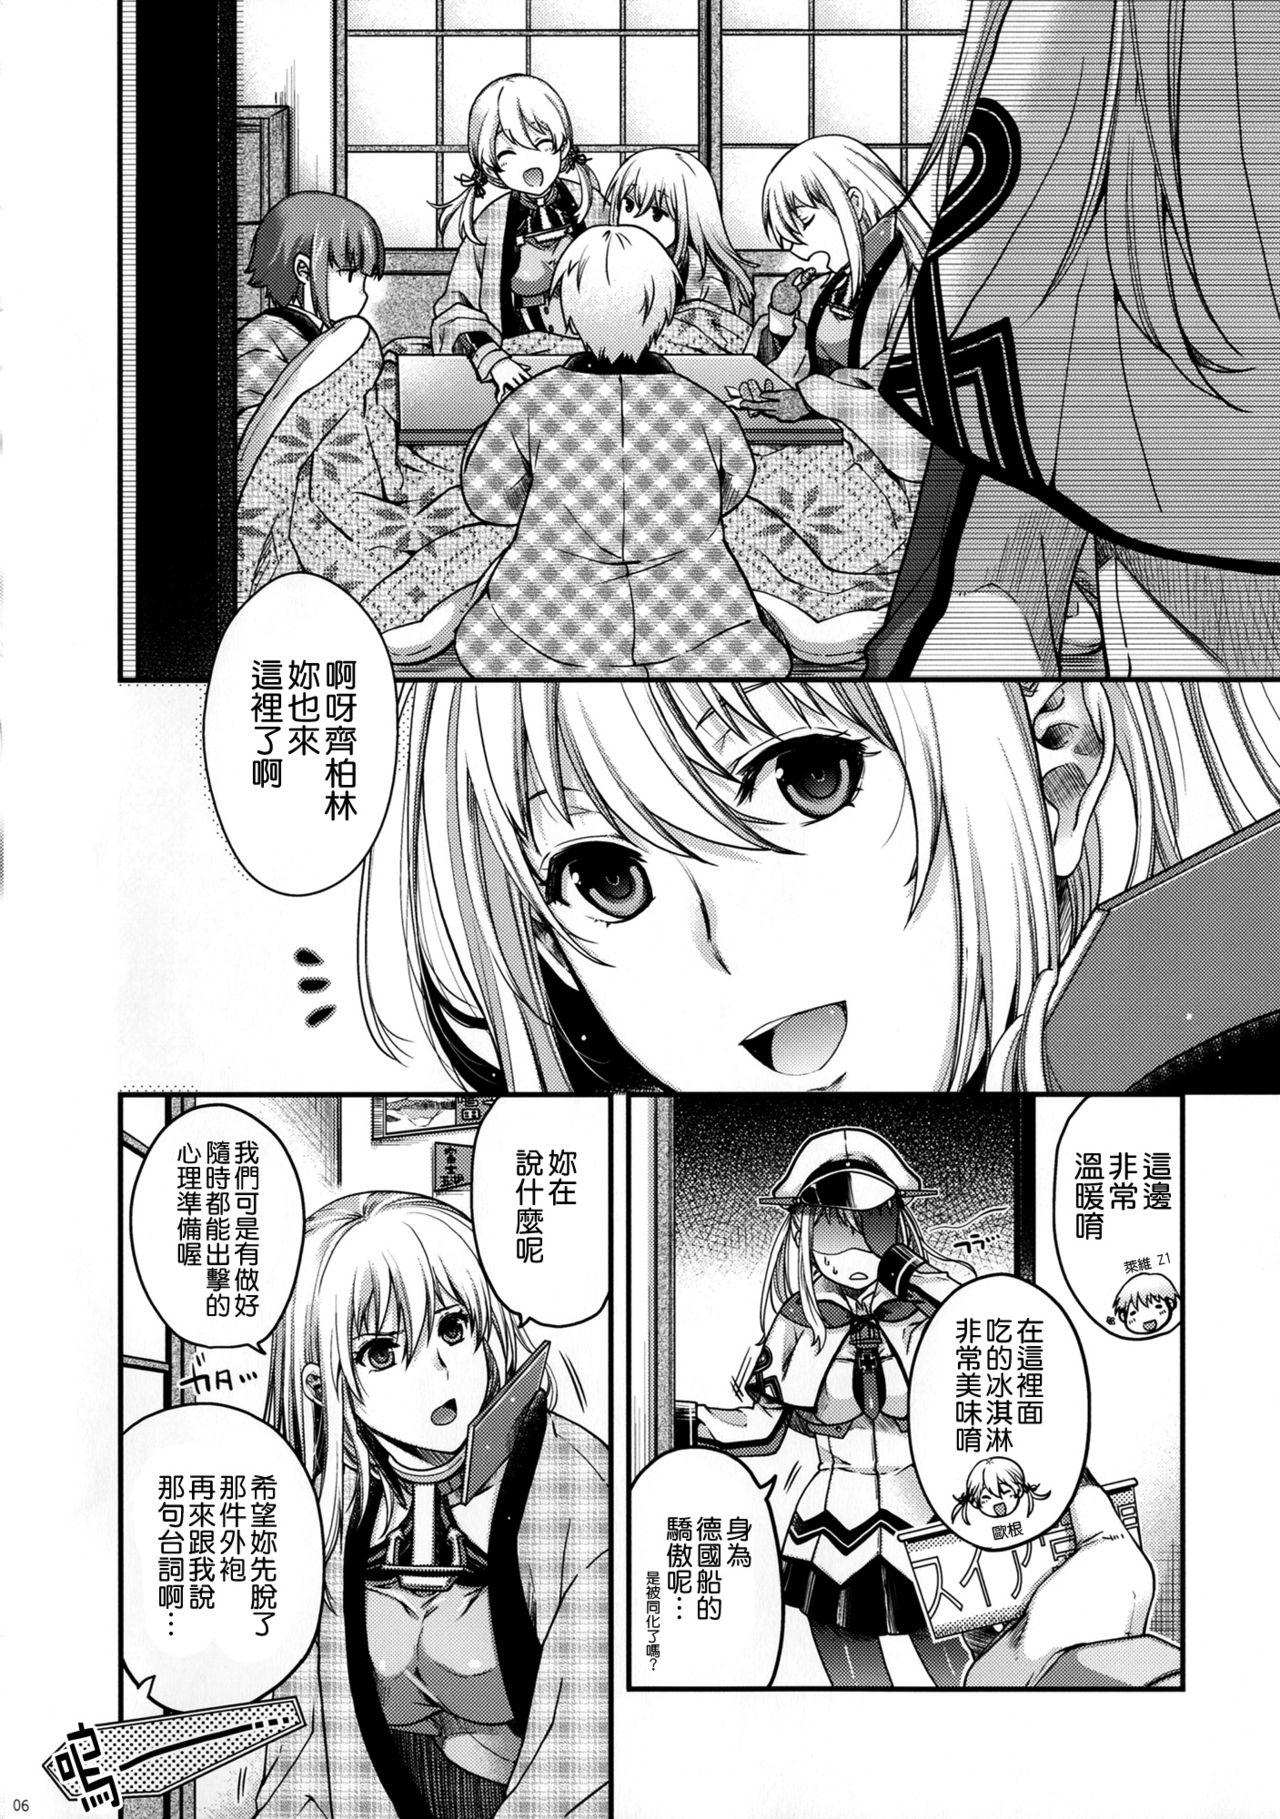 Interracial Admiral!!! + Omake Paper - Kantai collection Lolicon - Page 6